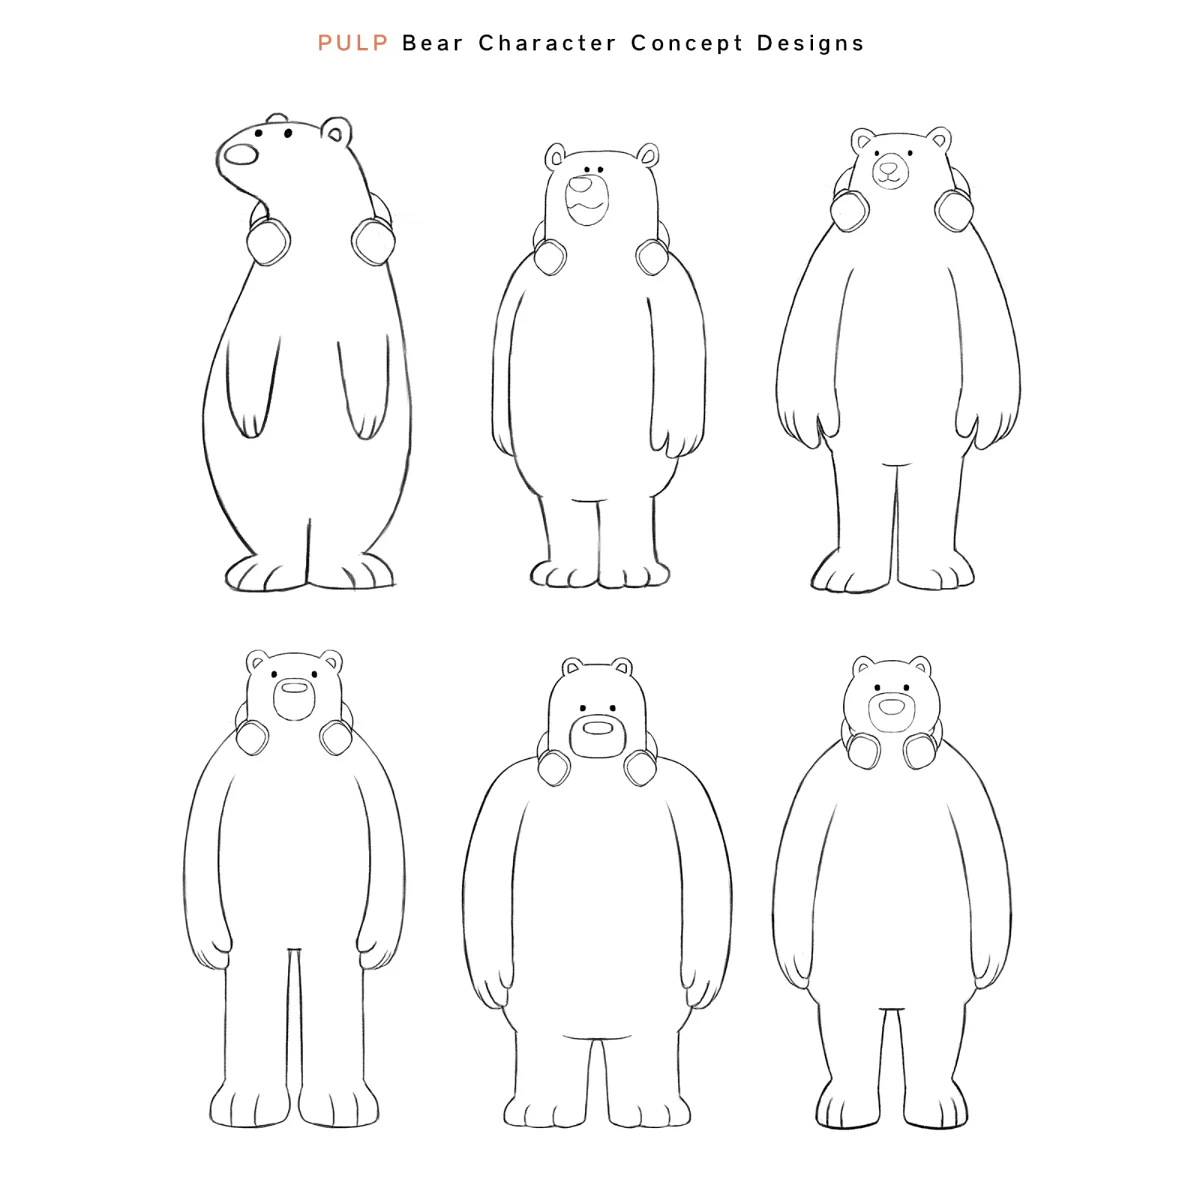 Our illustrator provided several character concept designs to determine a direction